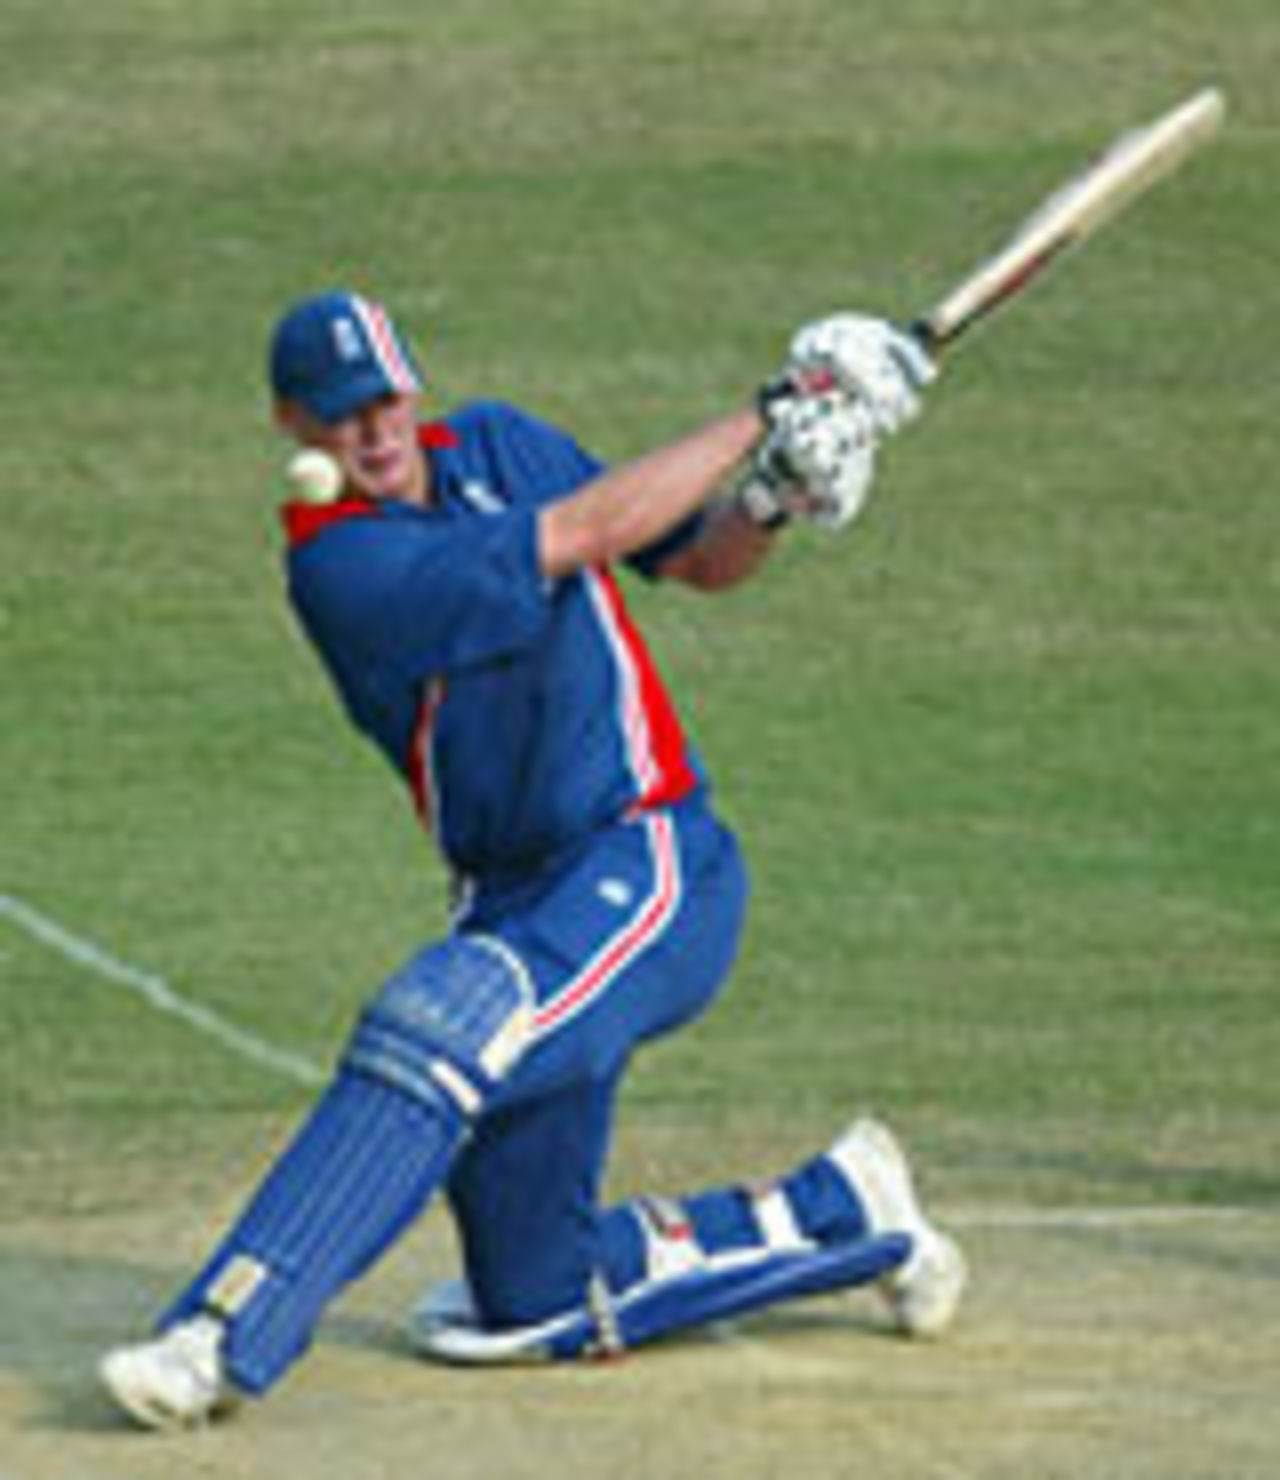 Andrew Flintoff launches into one on his way to 55*, Bangladesh v England, 1st ODI, Chittagong, November 7, 2003